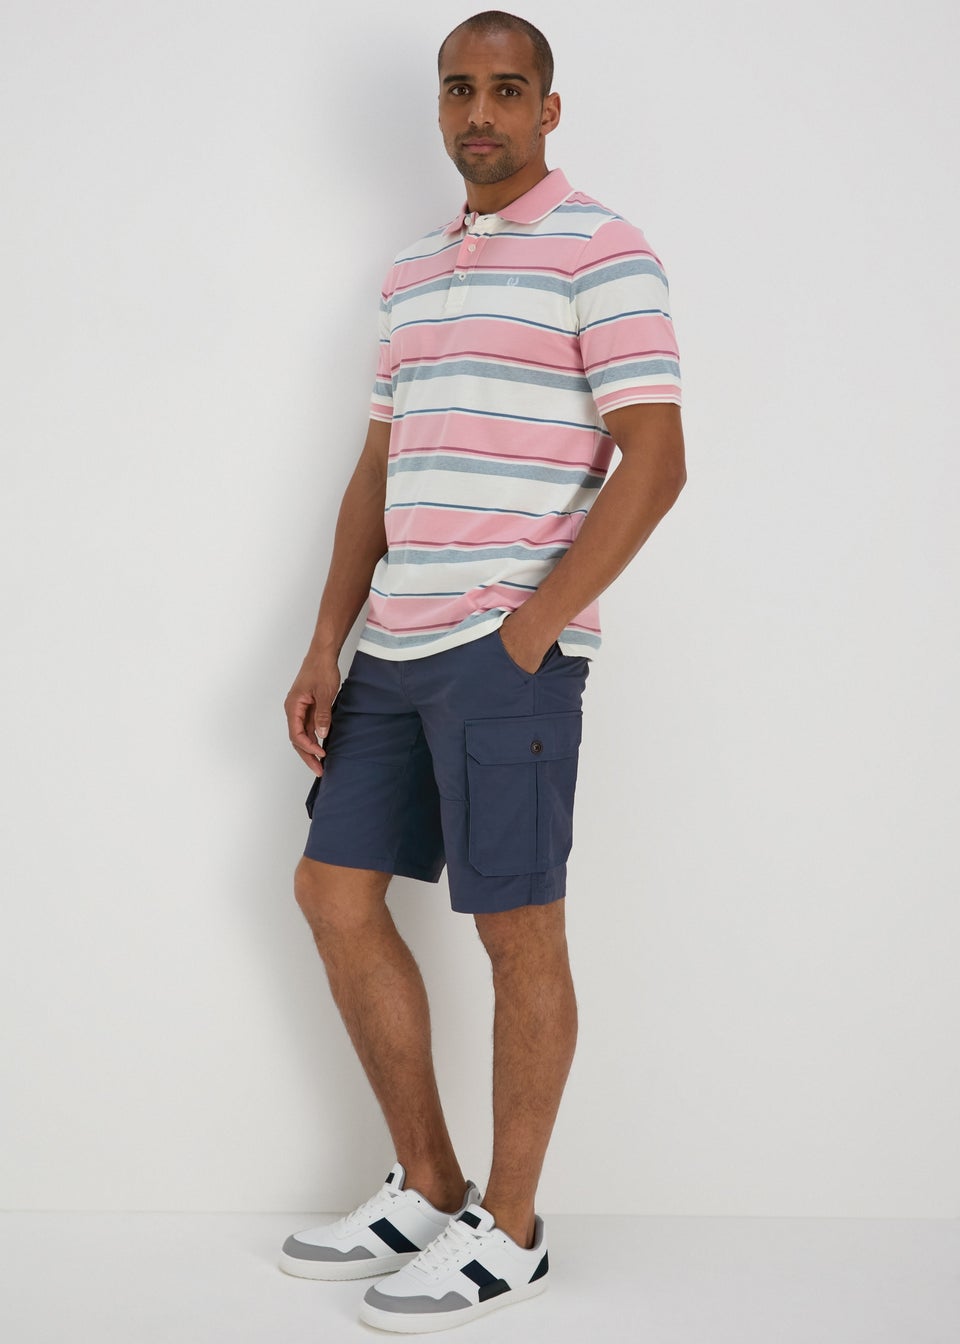 Lincoln Blue Belted Cargo Shorts